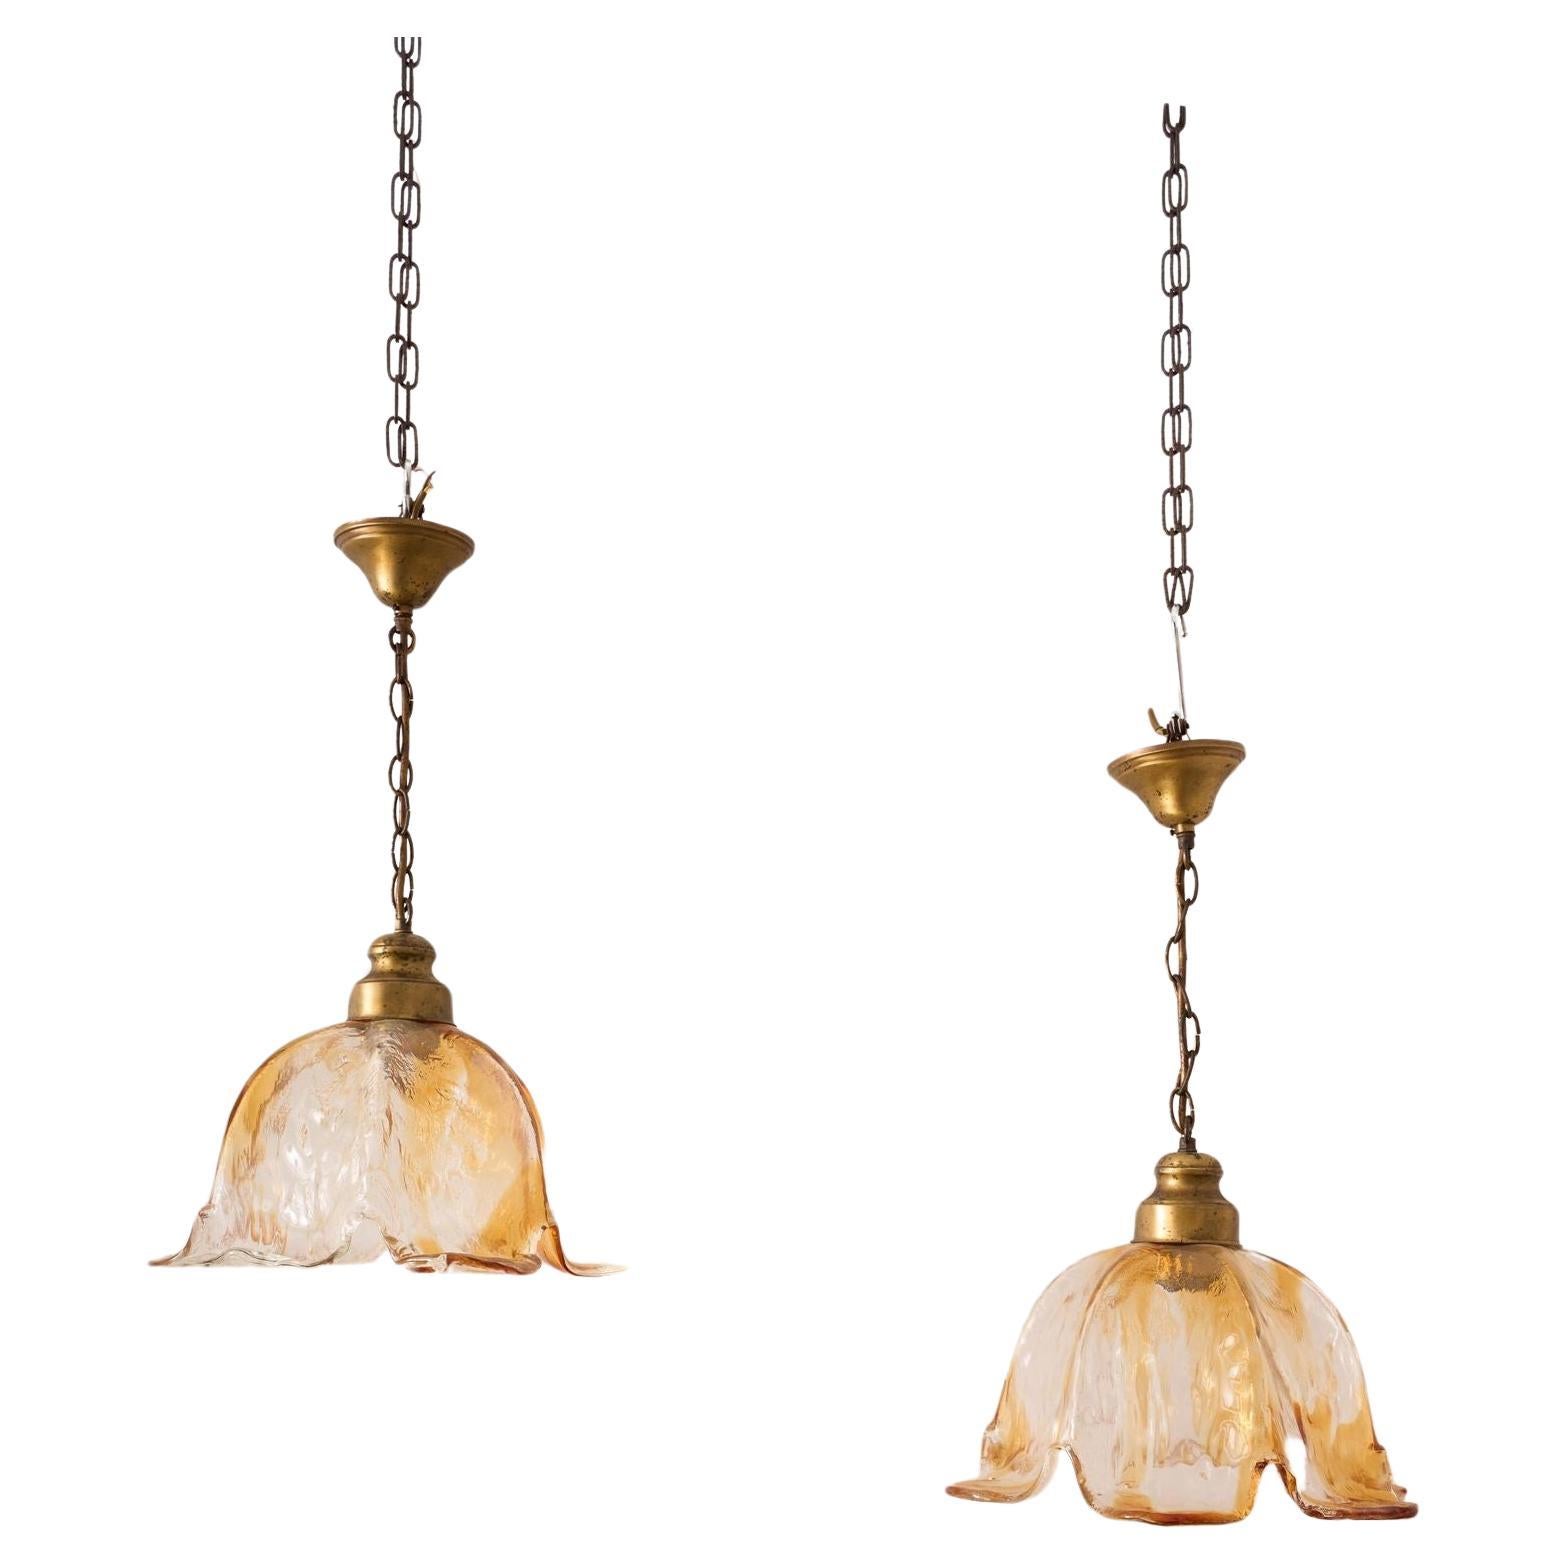 Spanish Amber glass tulip pendant lights - 10 available For Sale